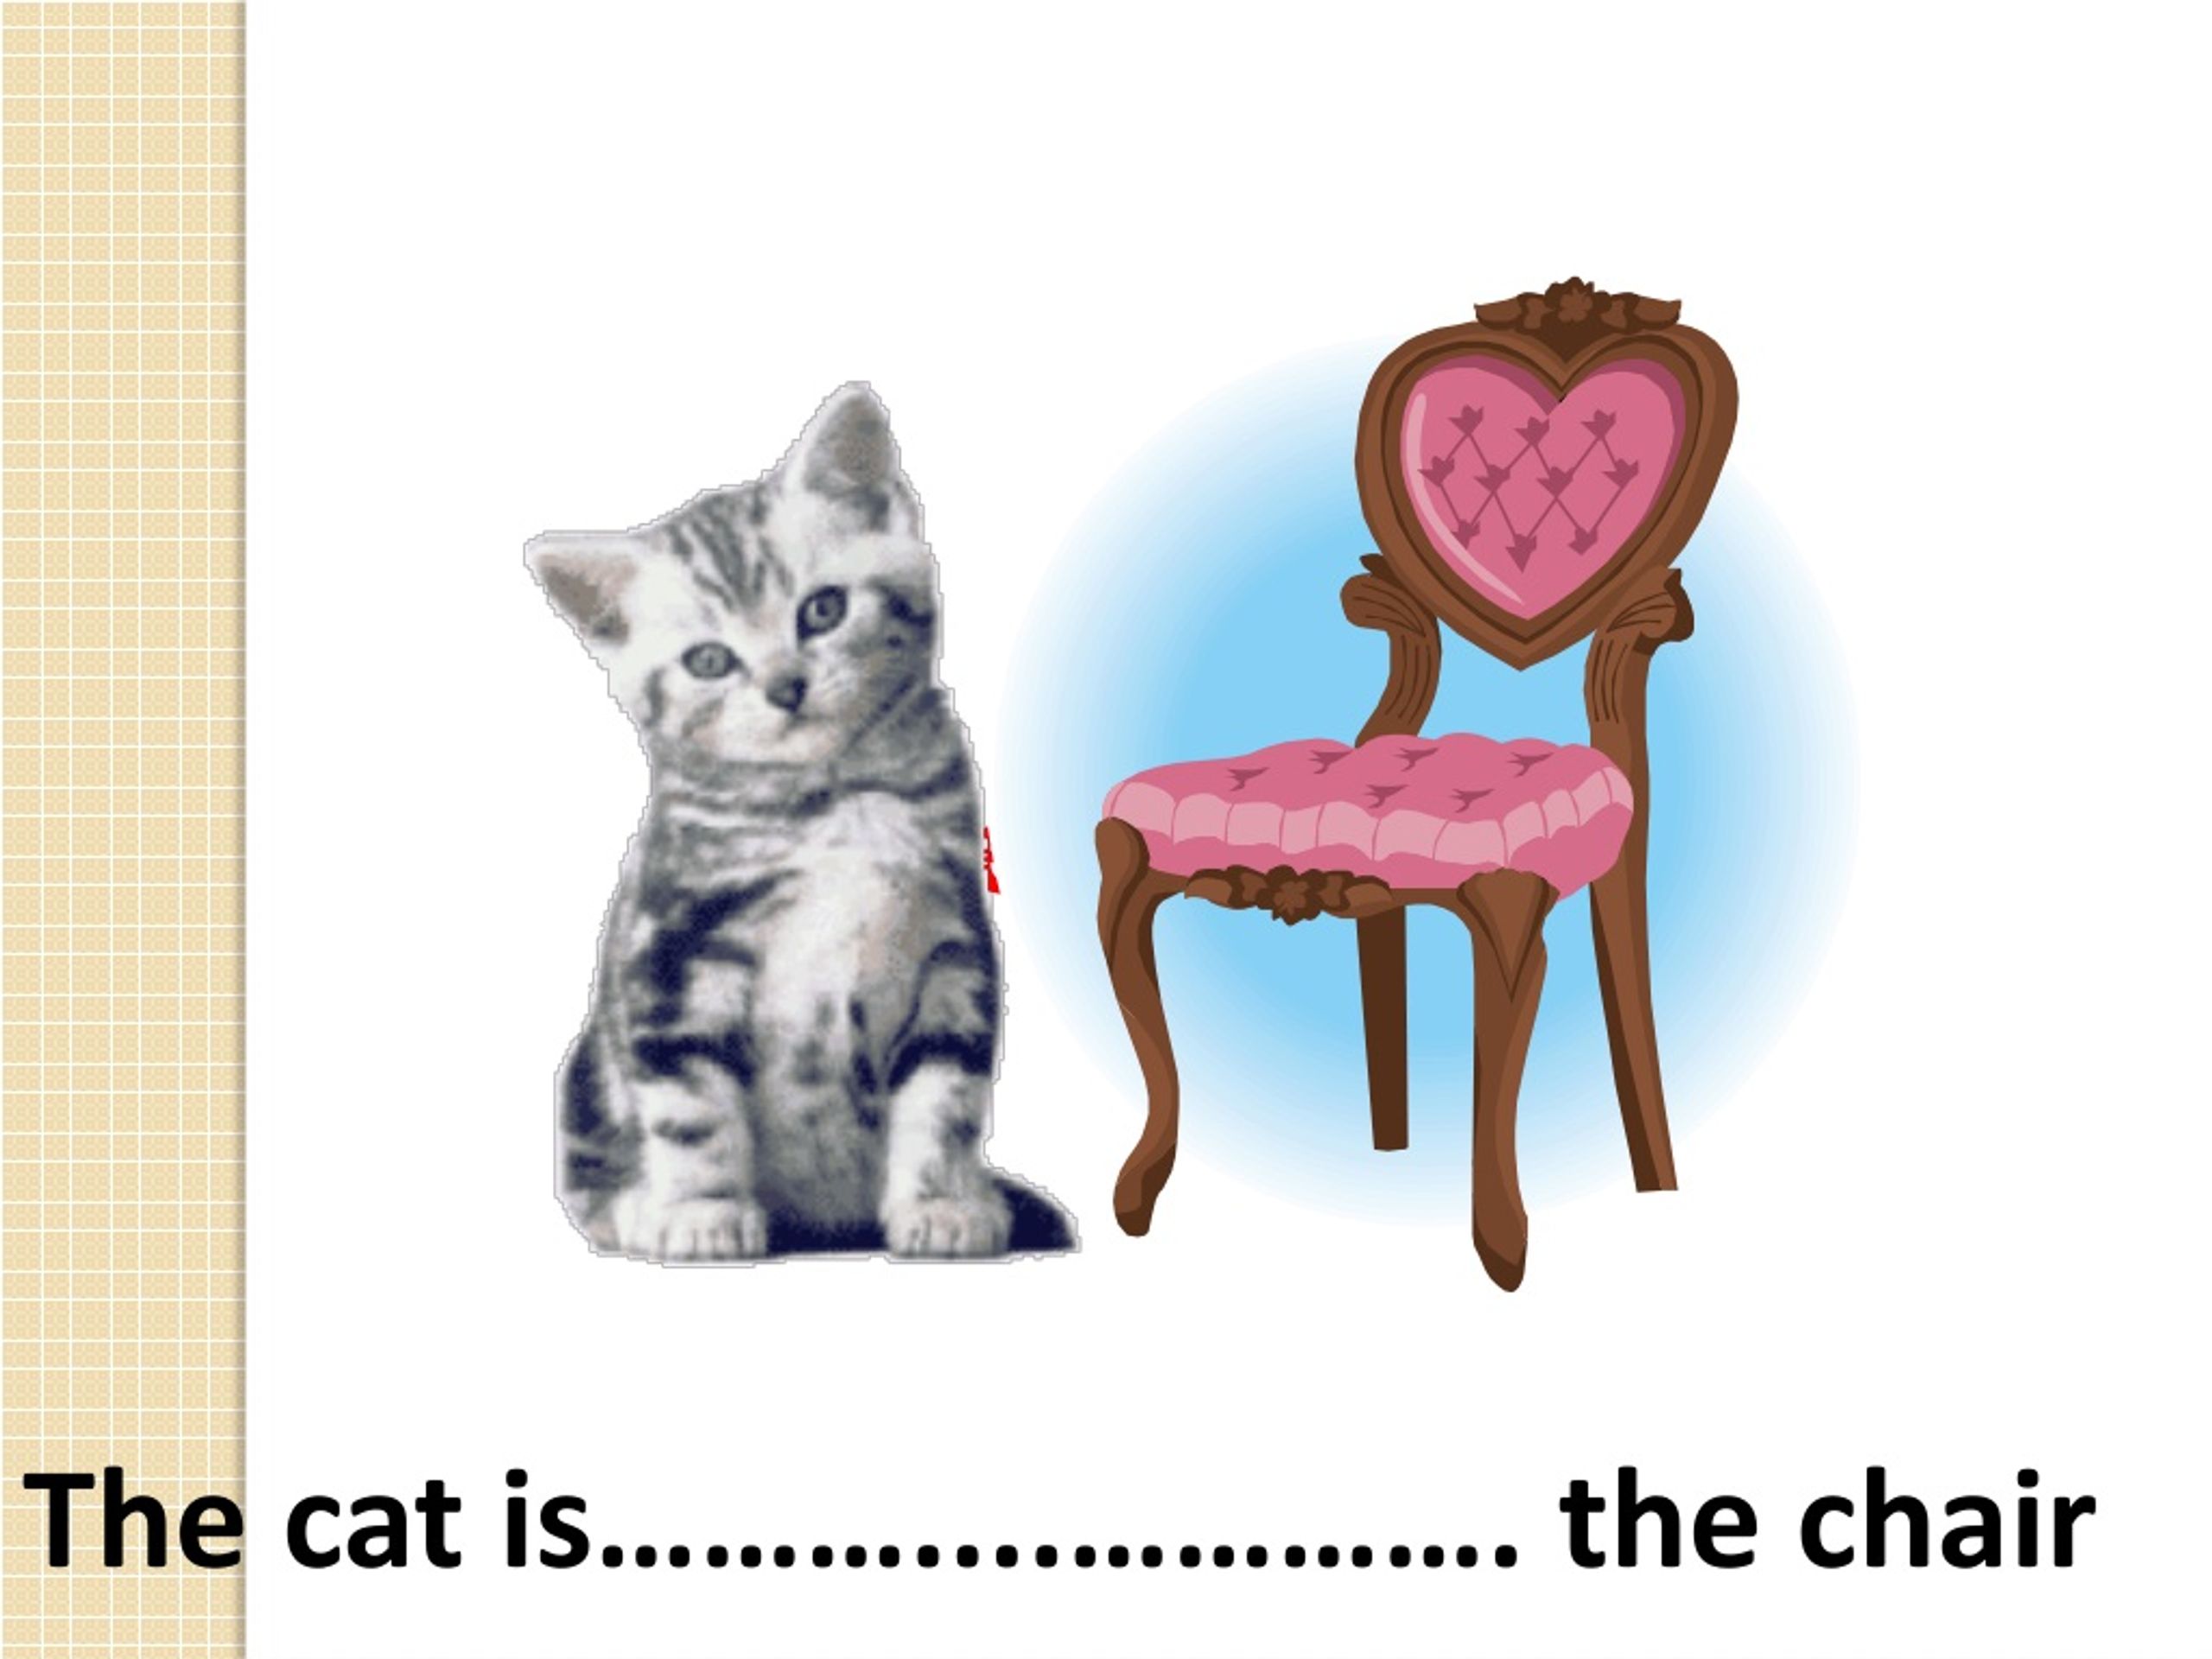 The cat is the chair